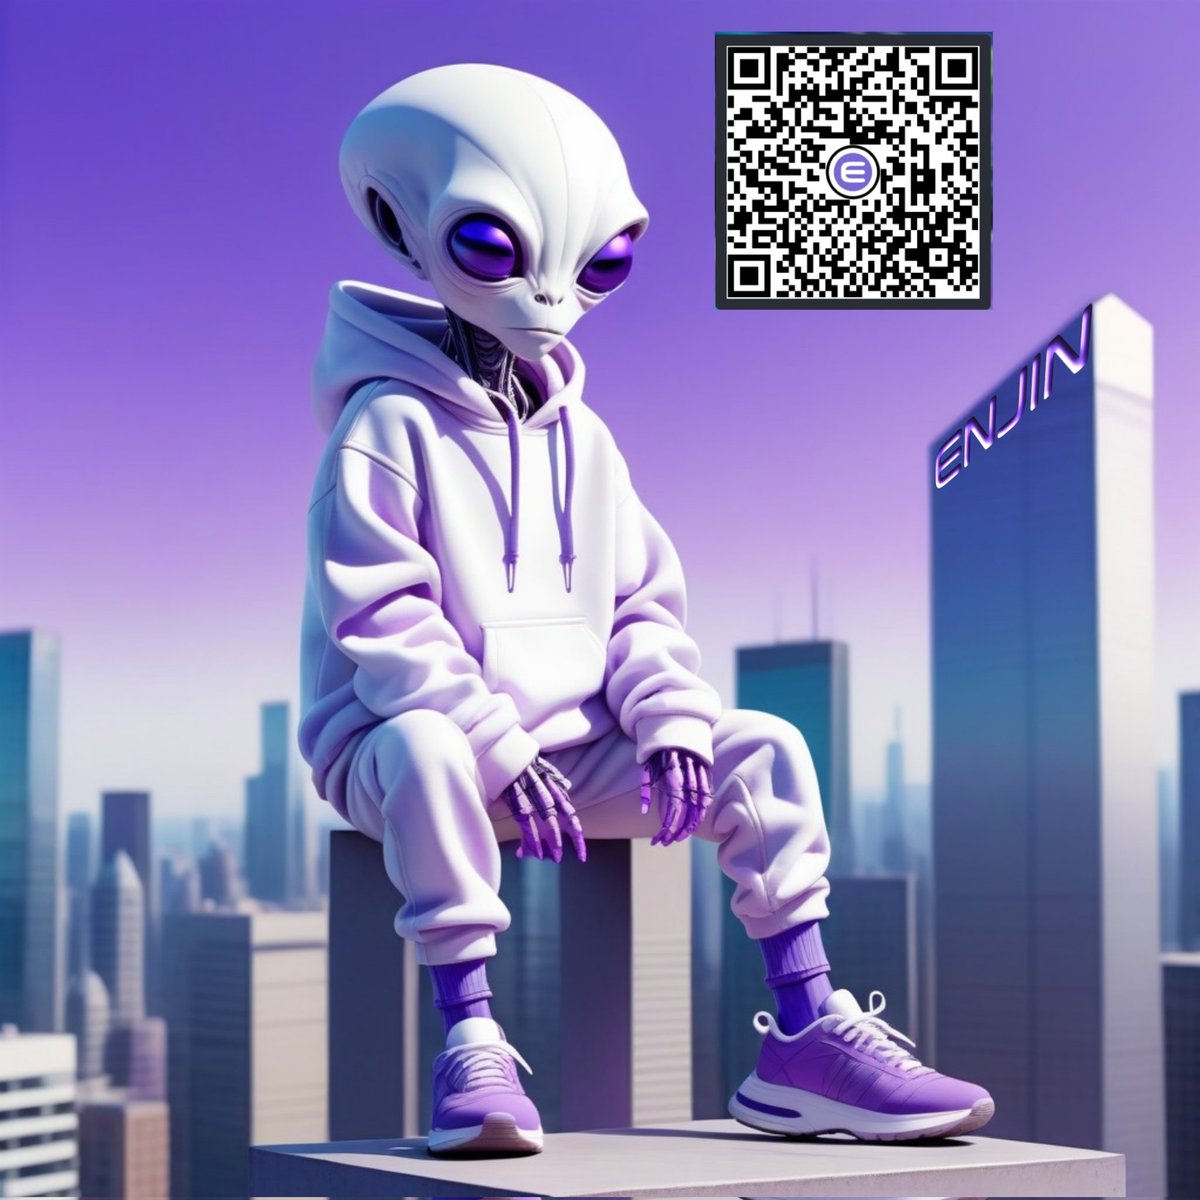 #Beam #Gifts #Enjin #Holders #Aliens Collection #FuelTheEnjin #EnjinFamily